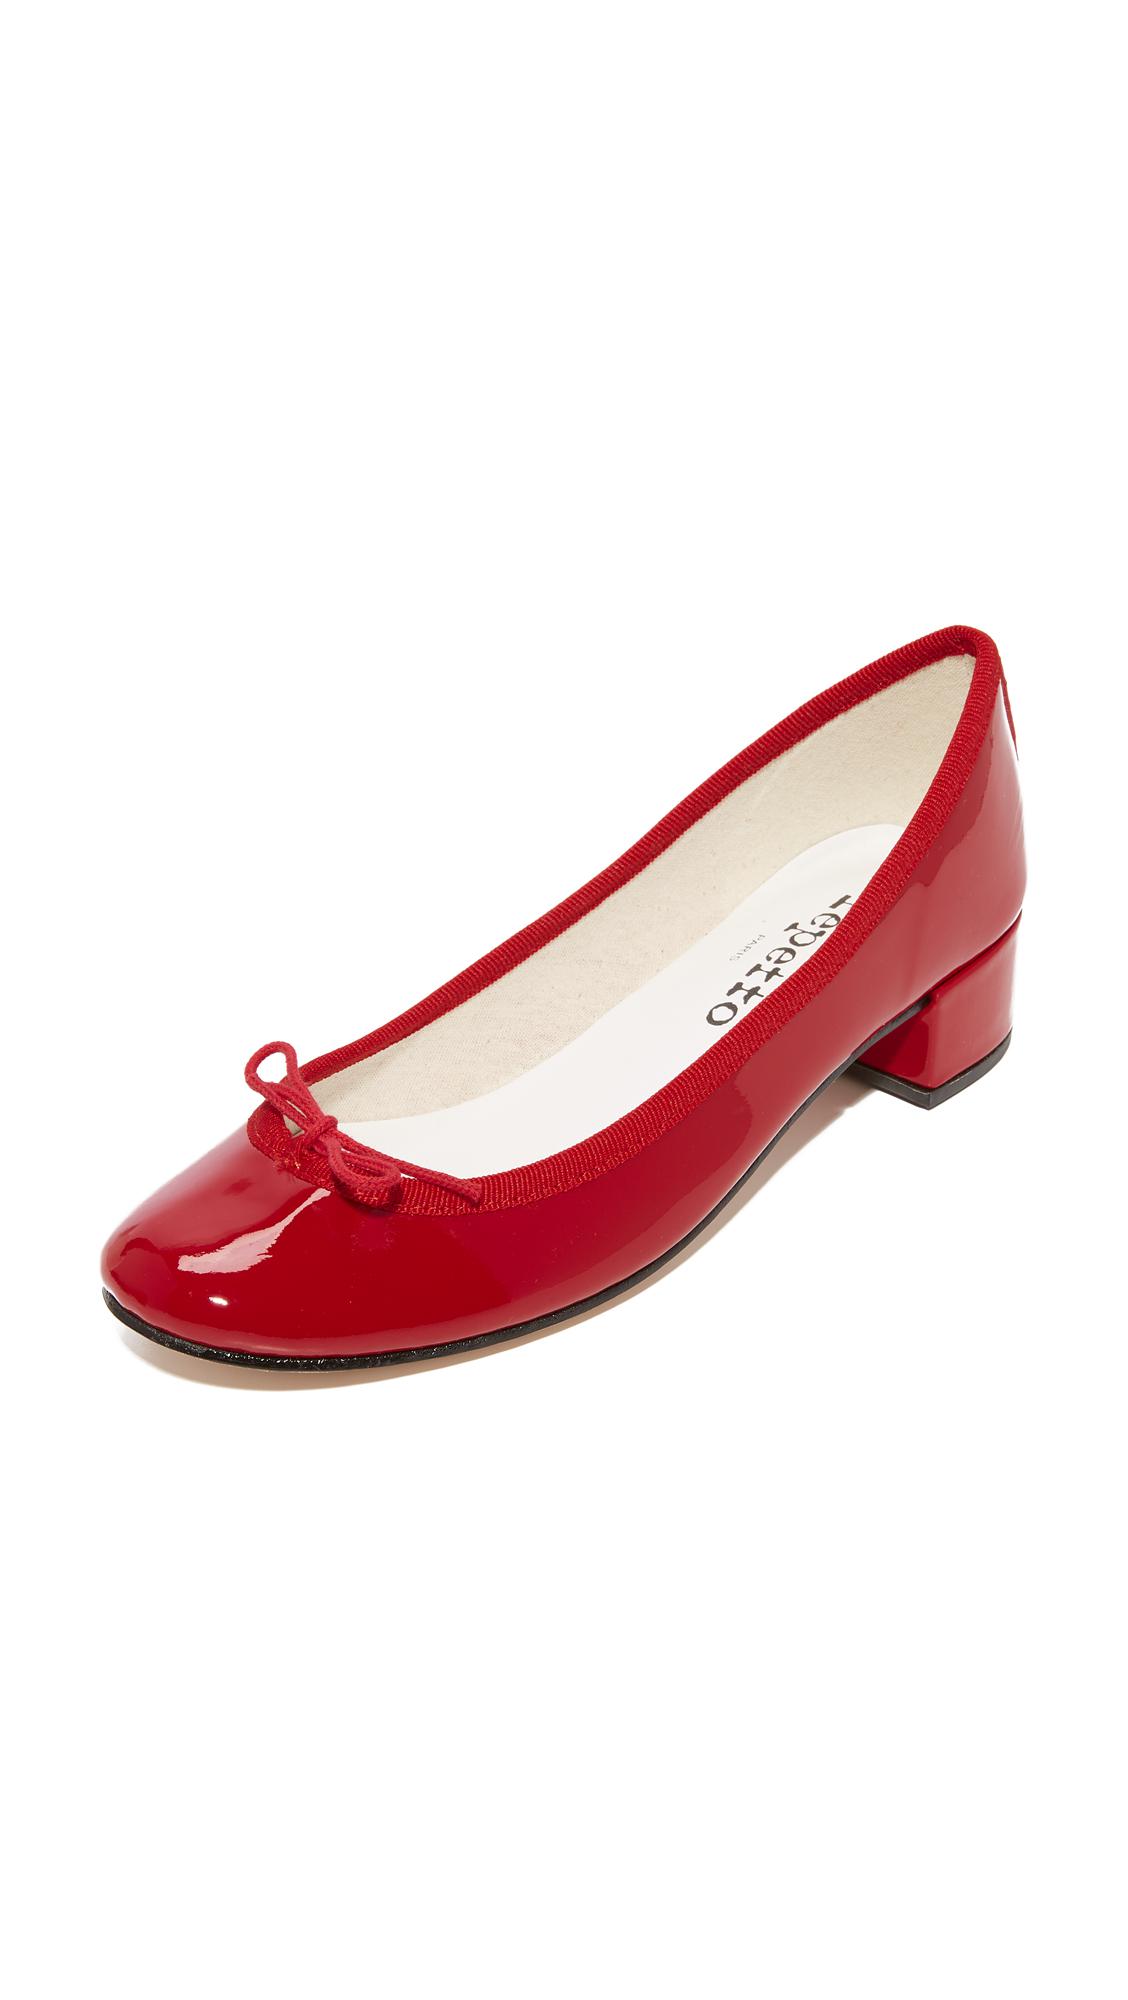 Virus se tv sammensmeltning Repetto Leather Camille Ballerina Heels in Red - Lyst